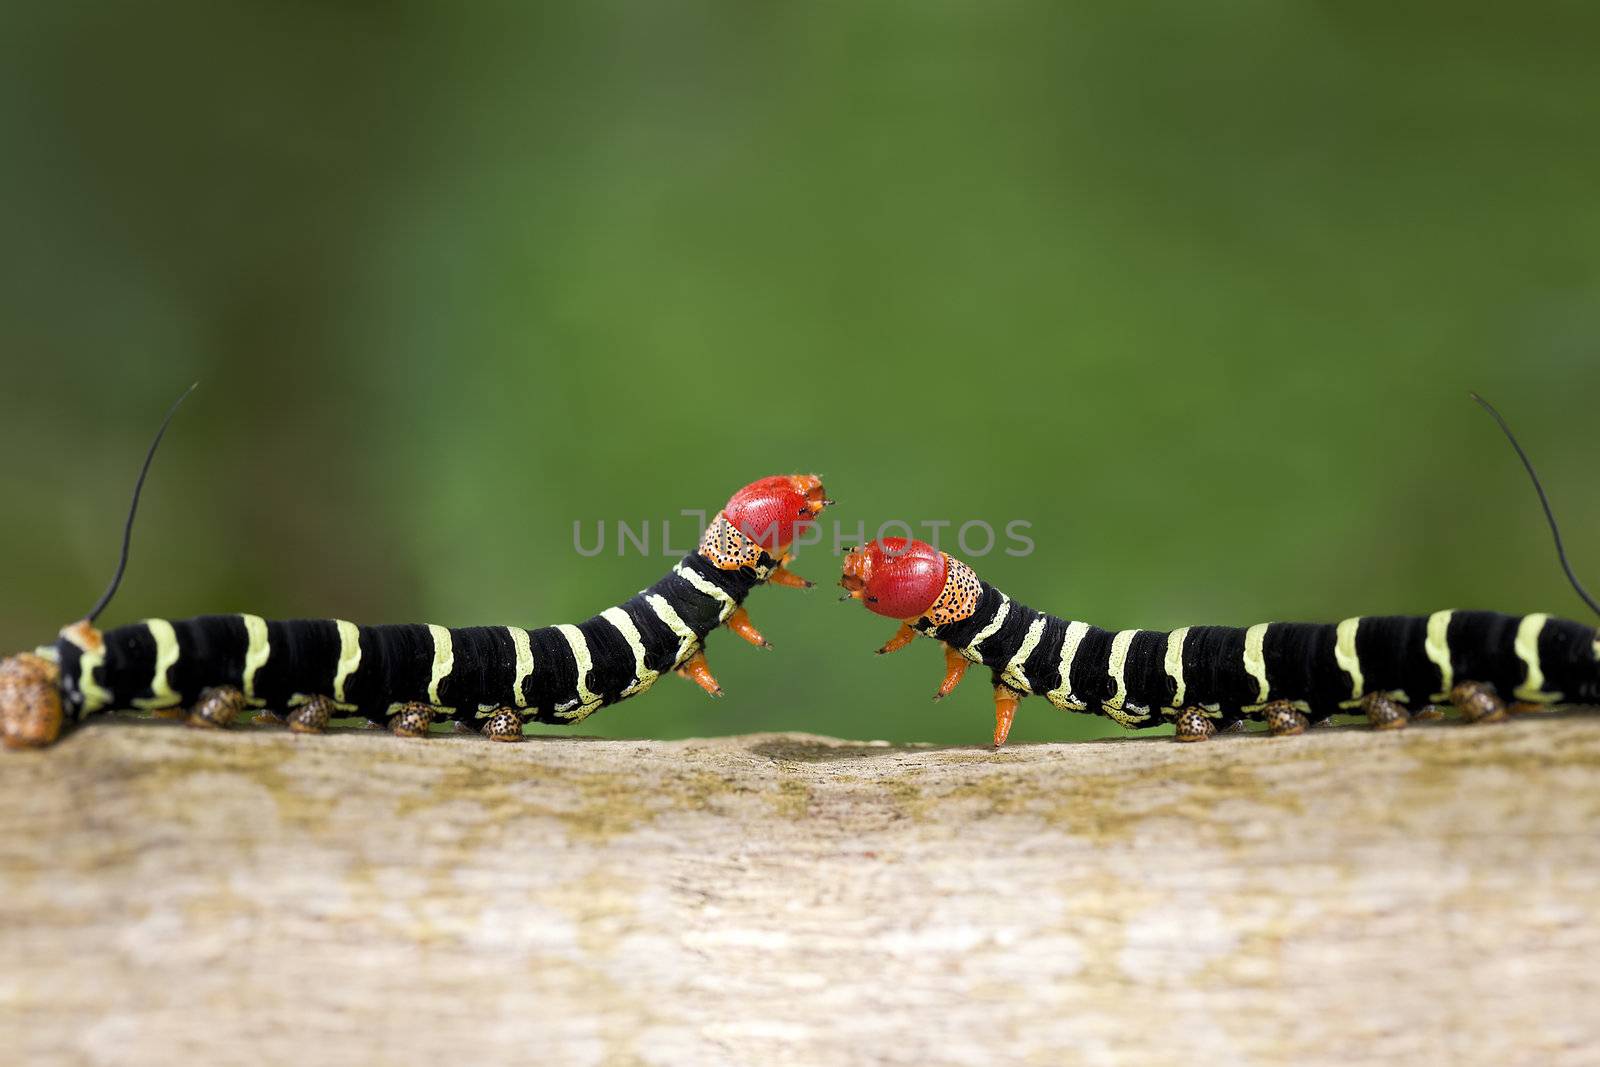 A close up shot of a two colorful caterpillars (Pseudosphinx tetrio) as they cross paths ready to fight or mate. Image was shot in Jamaica.